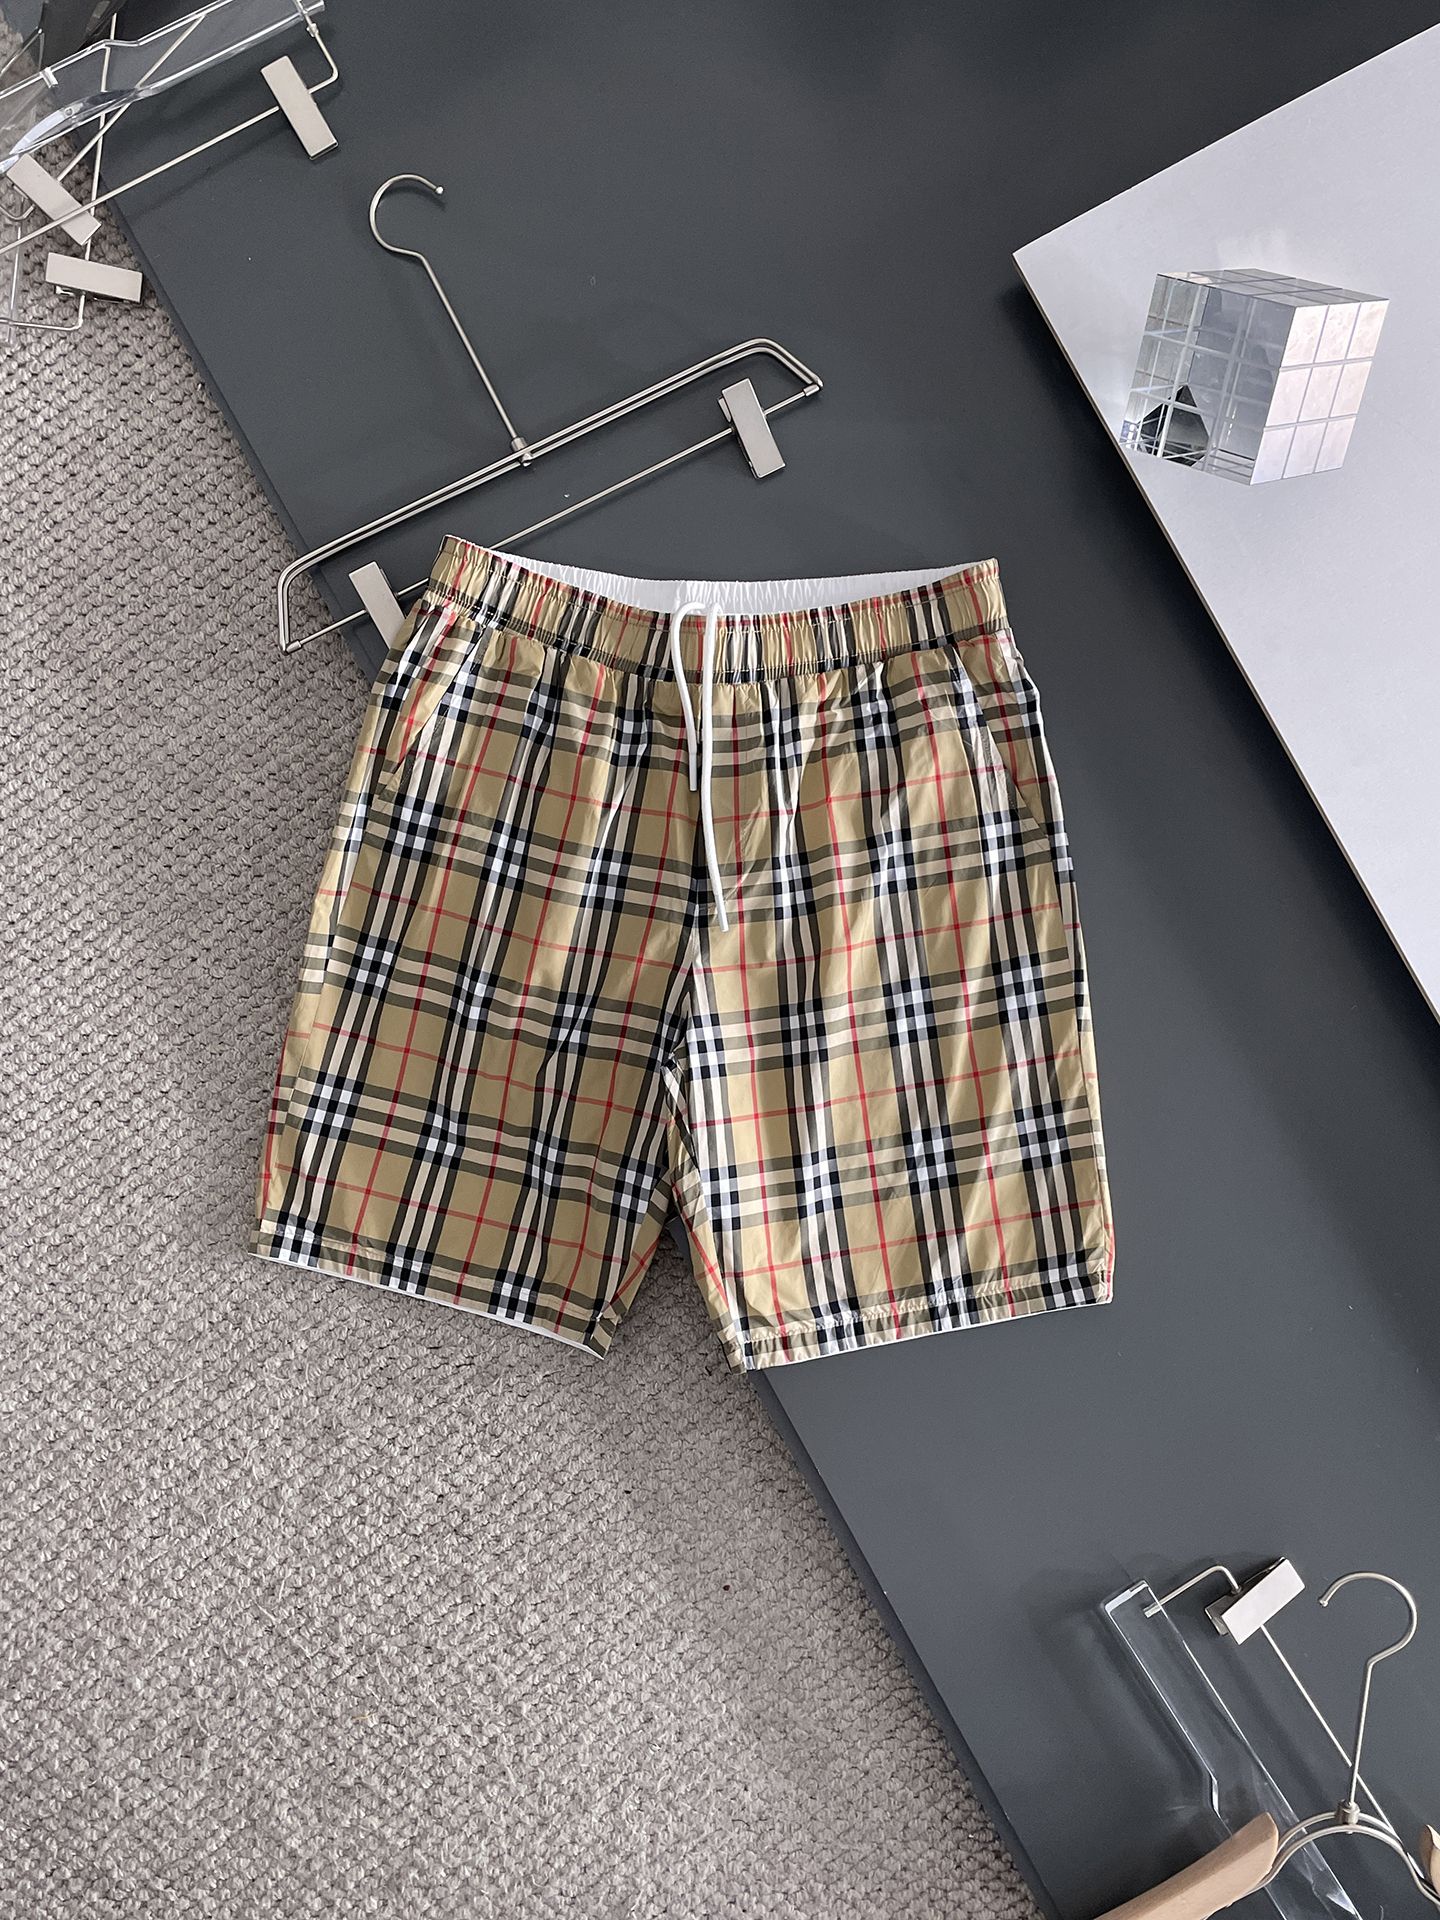 Burberry Clothing Shorts Men Summer Collection Casual